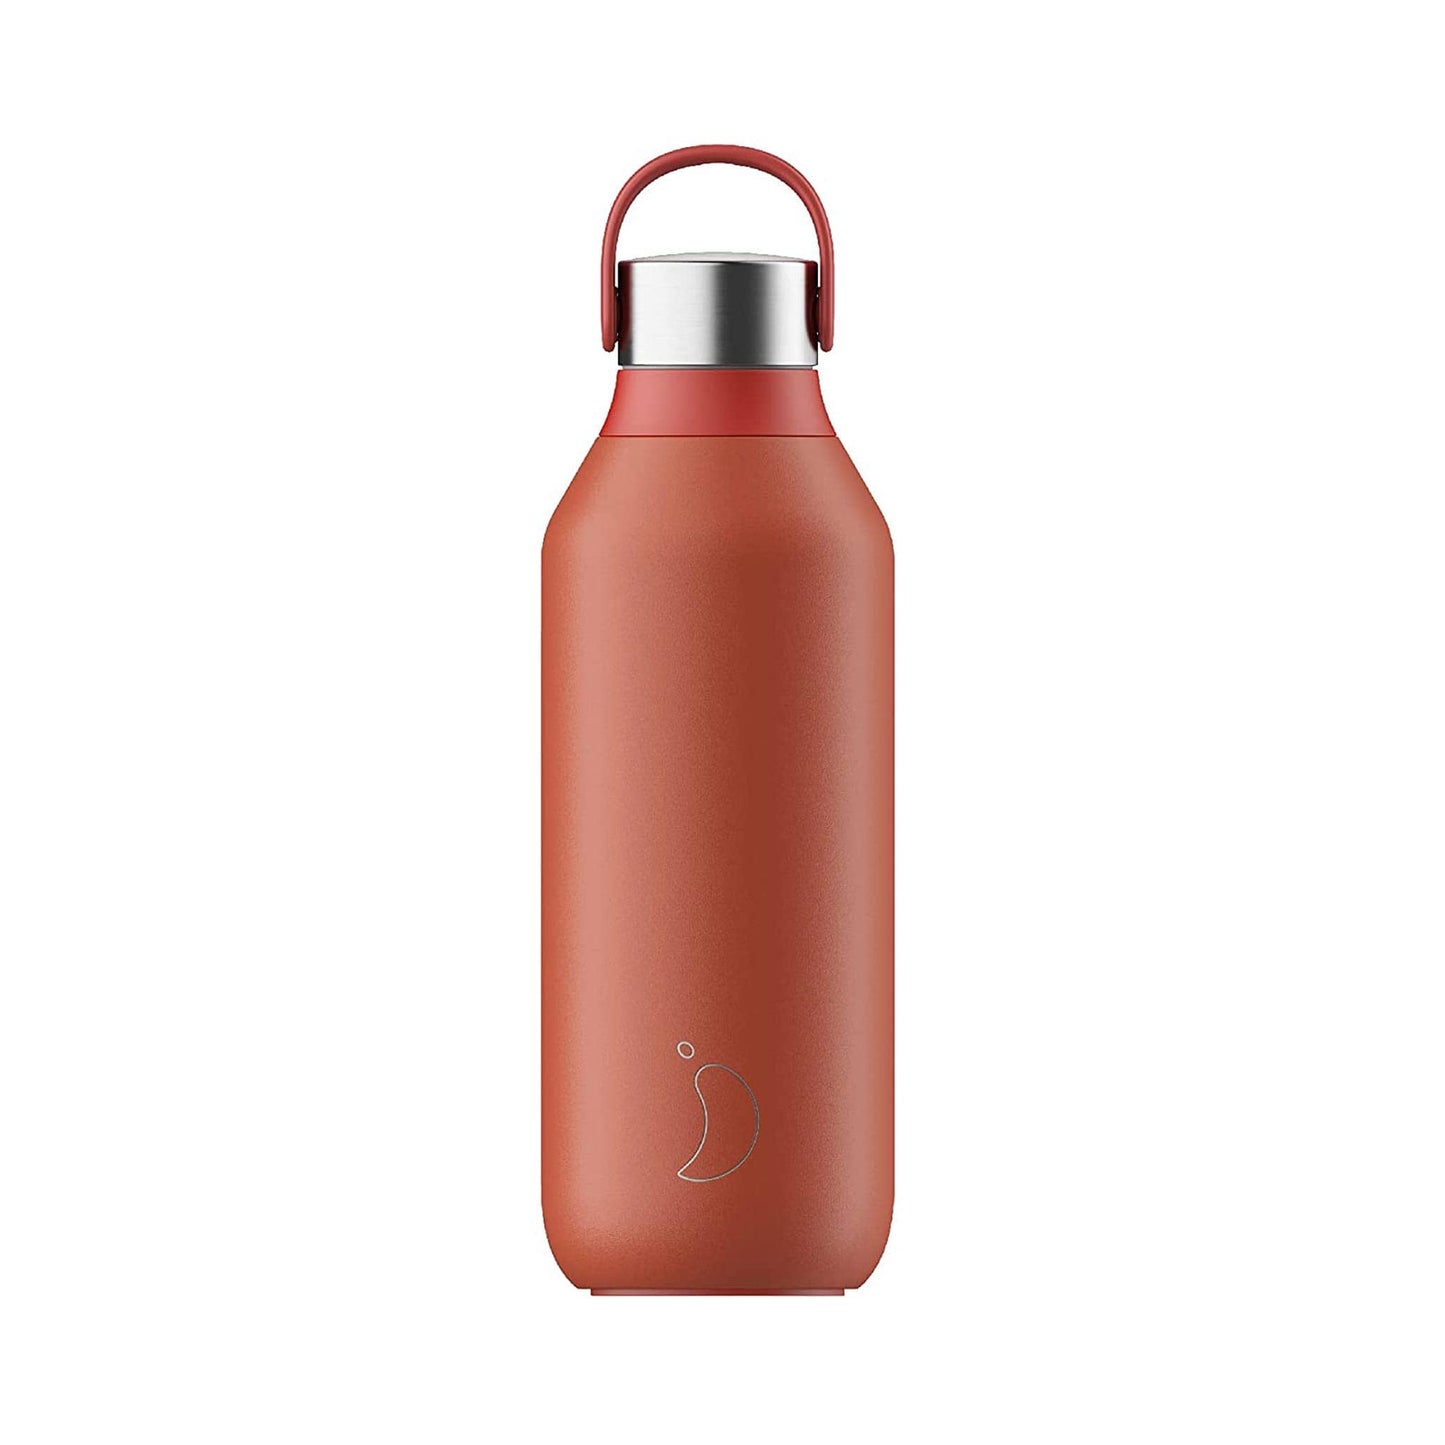 Chilly's Water Bottles Chilly’s 500ml Series 2 Stainless Steel Water Bottle - Maple Red